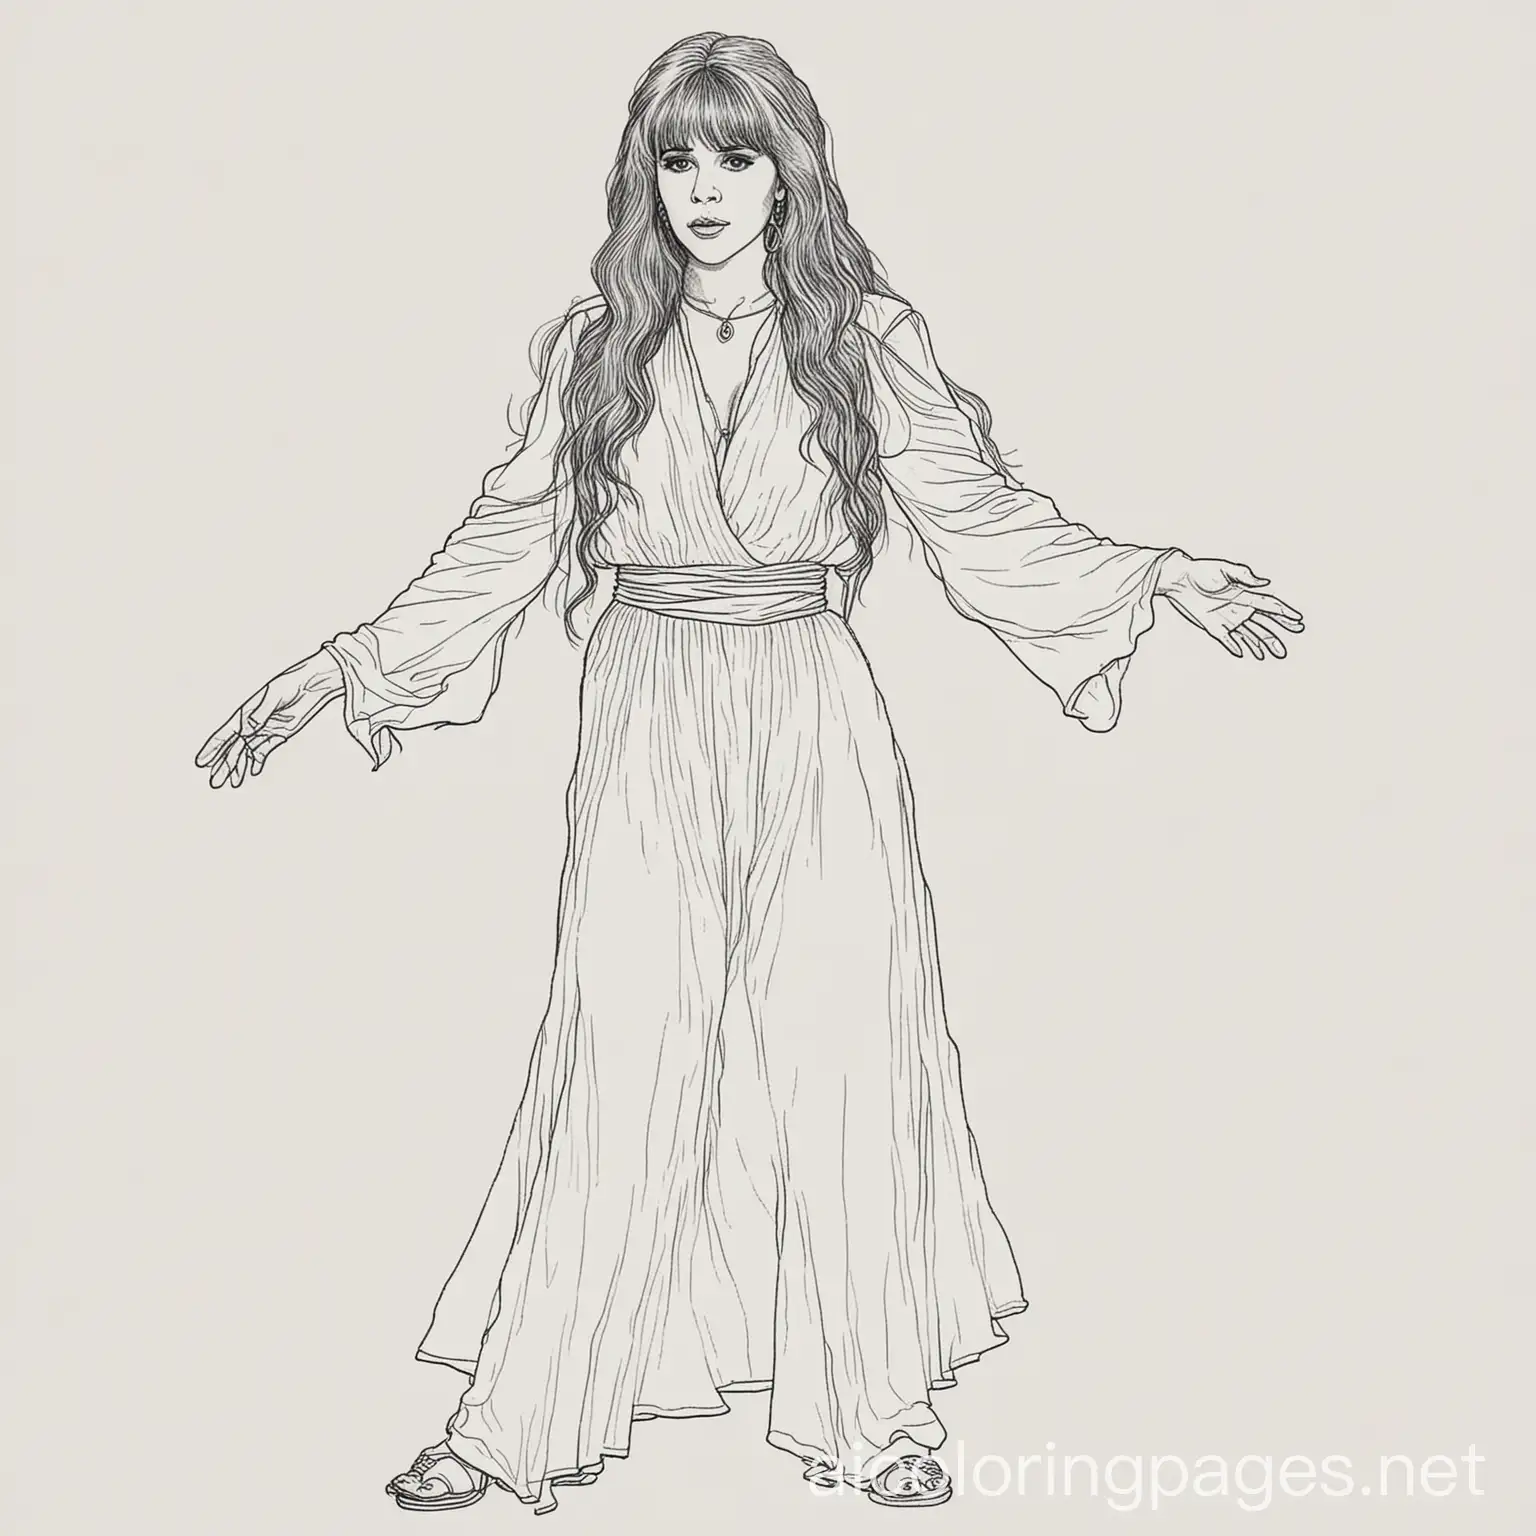 Stevie Nicks doing her classic dance, Coloring Page, black and white, line art, white background, Simplicity, Ample White Space. The background of the coloring page is plain white to make it easy for young children to color within the lines. The outlines of all the subjects are easy to distinguish, making it simple for kids to color without too much difficulty